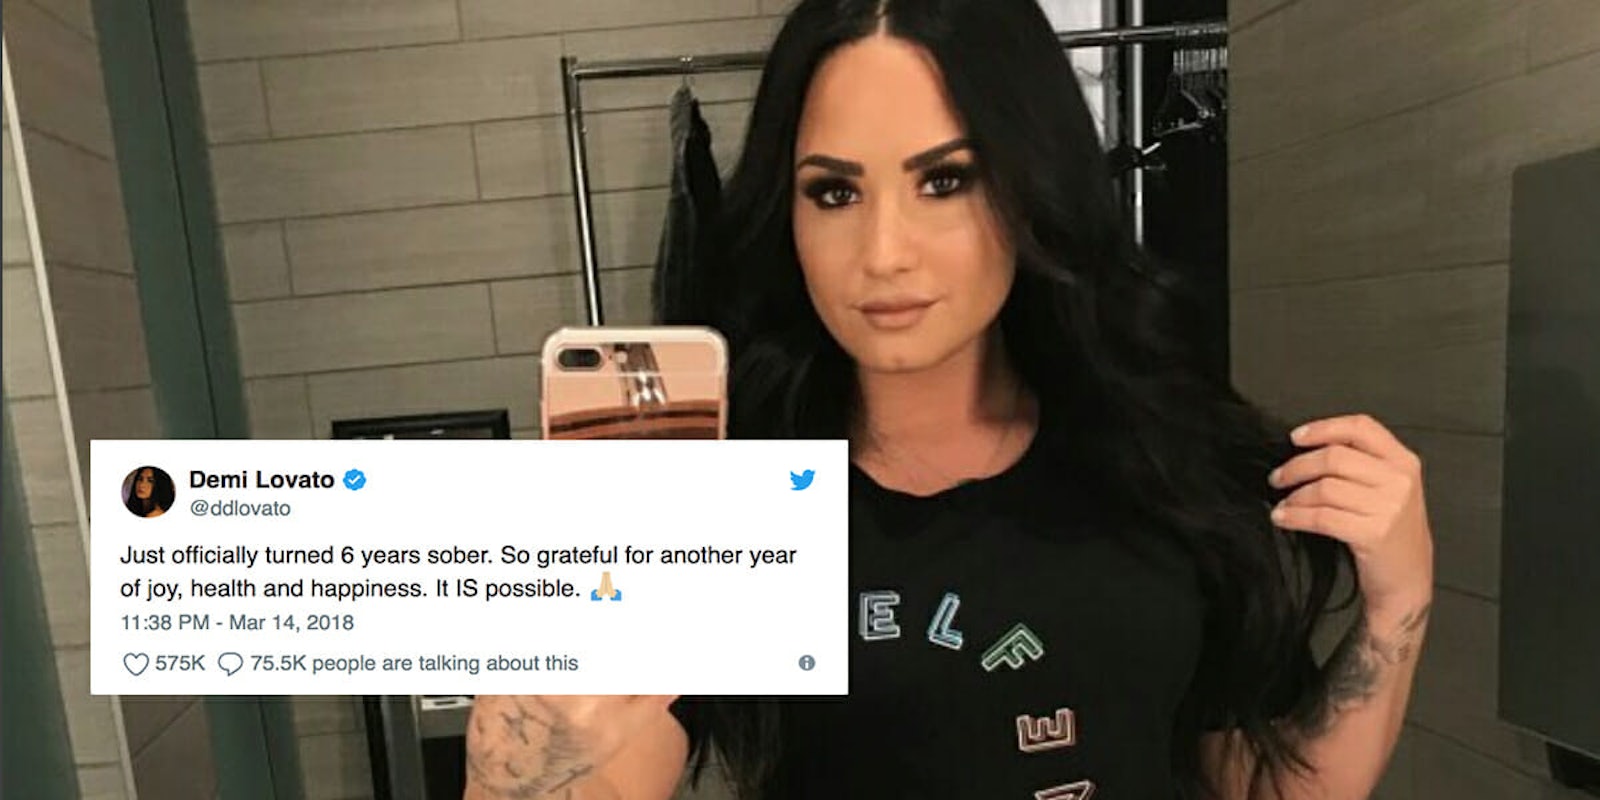 After six years of sobriety, Demi Lovato reveals relapse on new song 'Sober.'